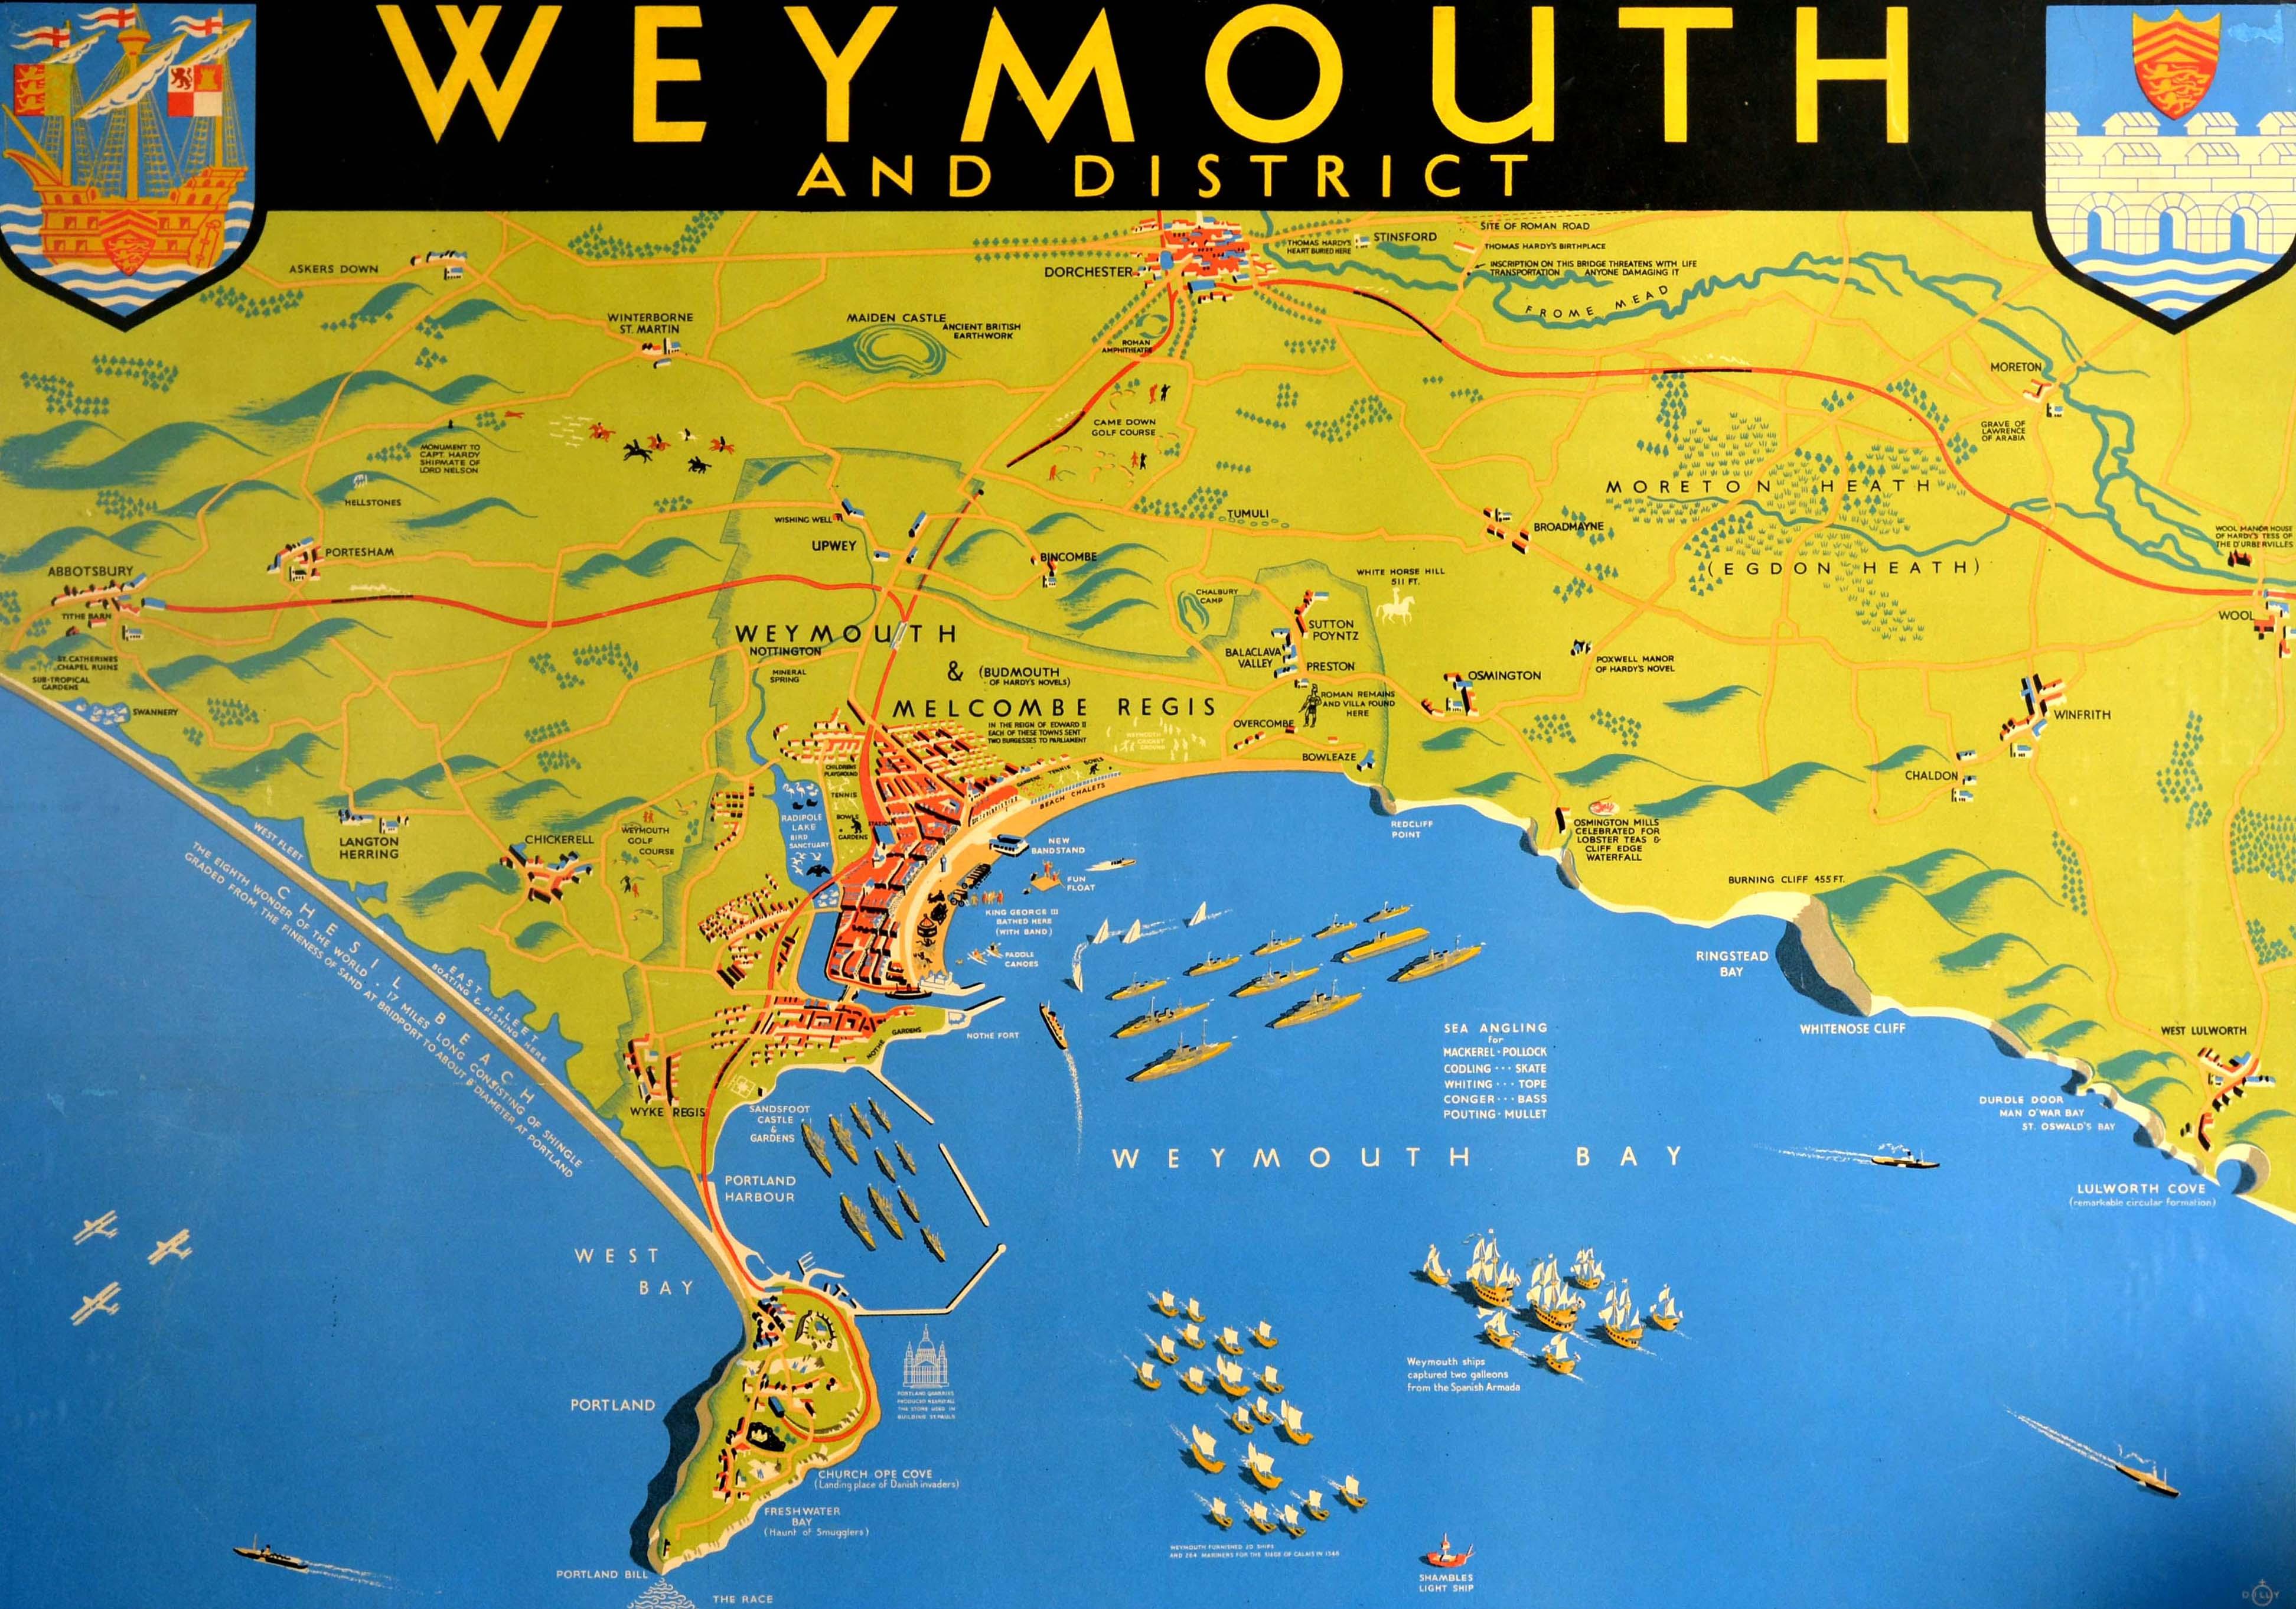 Original vintage railway travel poster advertising Weymouth and District Frequent Express Trains and Cheap Fares GWR Great Western Railway SR Southern Railway featuring a pictorial map of Weymouth and Melcombe Regis with significant locations and